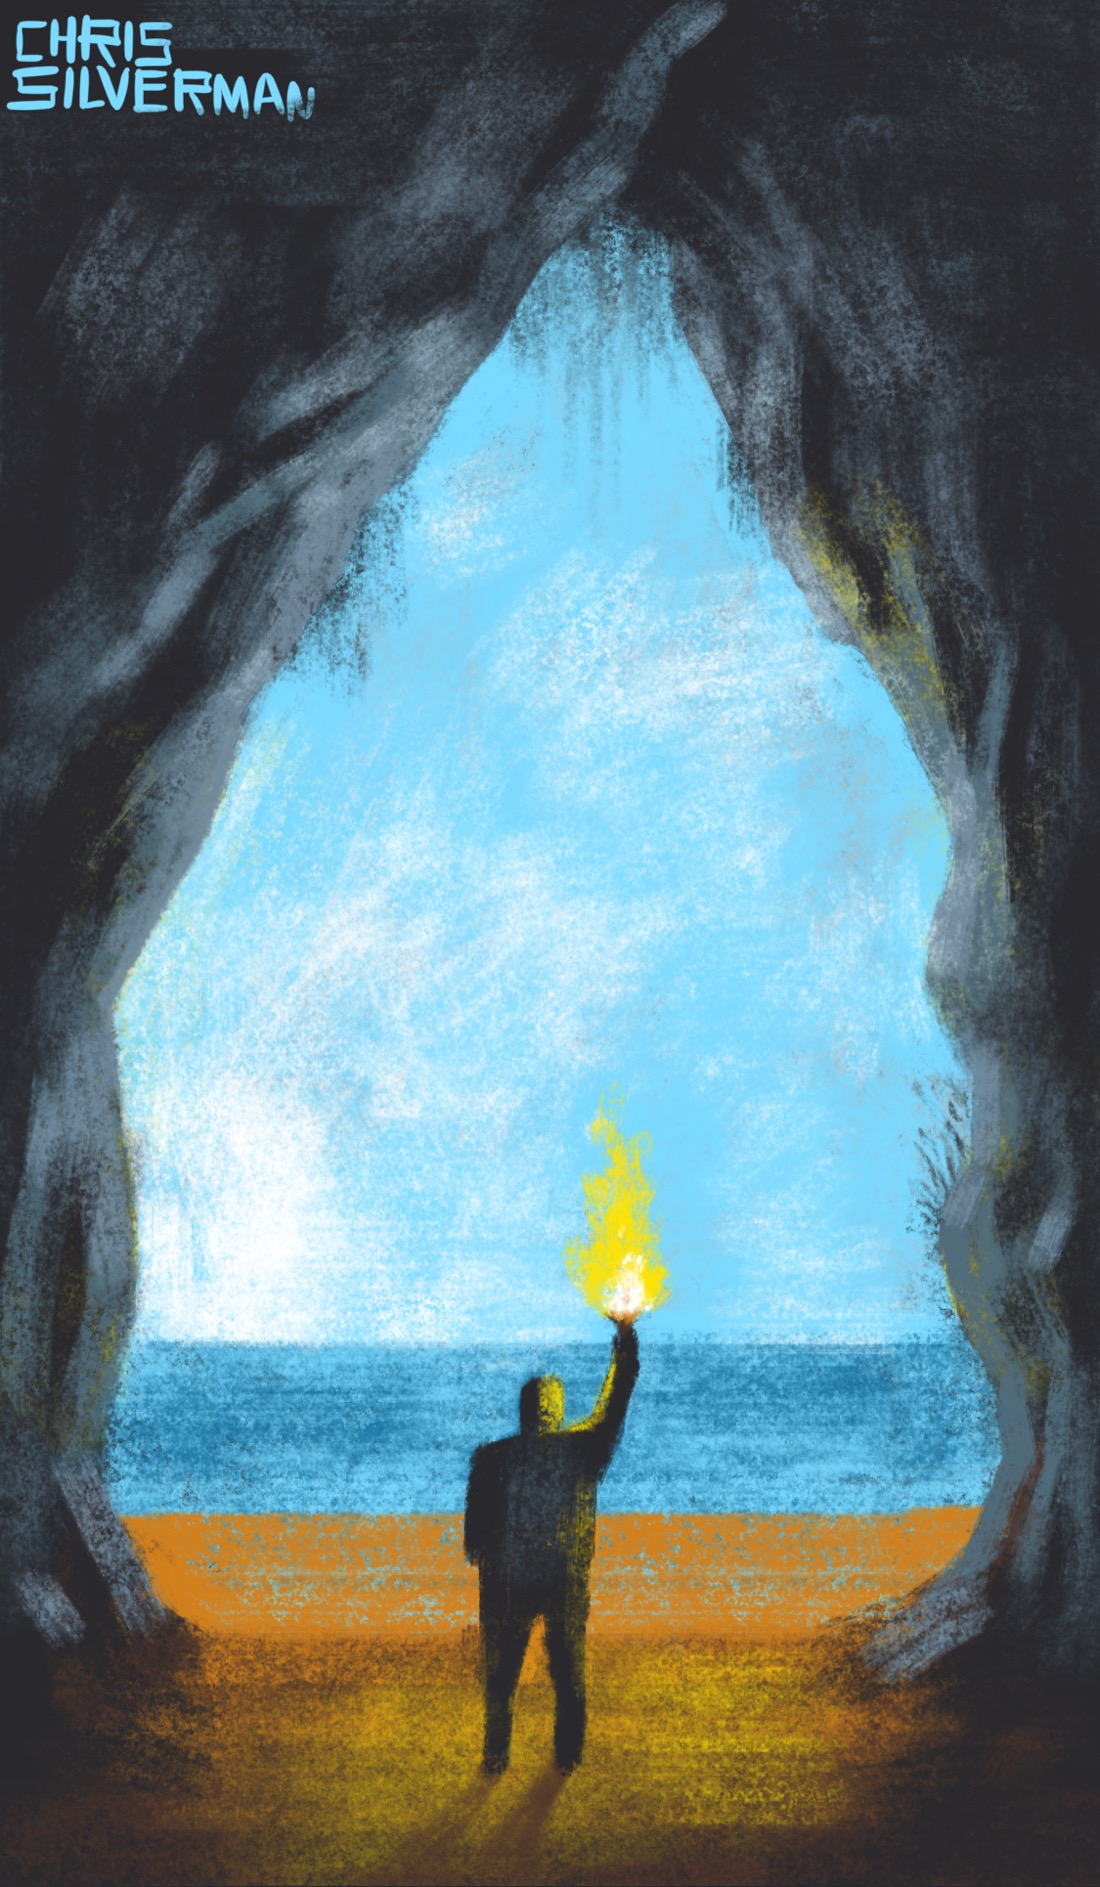 The tall, rocky archway of the mouth of a cave. You're standing inside the cave, looking out. In front of you is a small figure, silhouetted in the opening, holding up a glowing yellow torch. The figure is about a third of the height of the cave opening. The opening looks out onto the ocean and the blue sky beyond. The floor of the cave is brown, the rocks are gray.